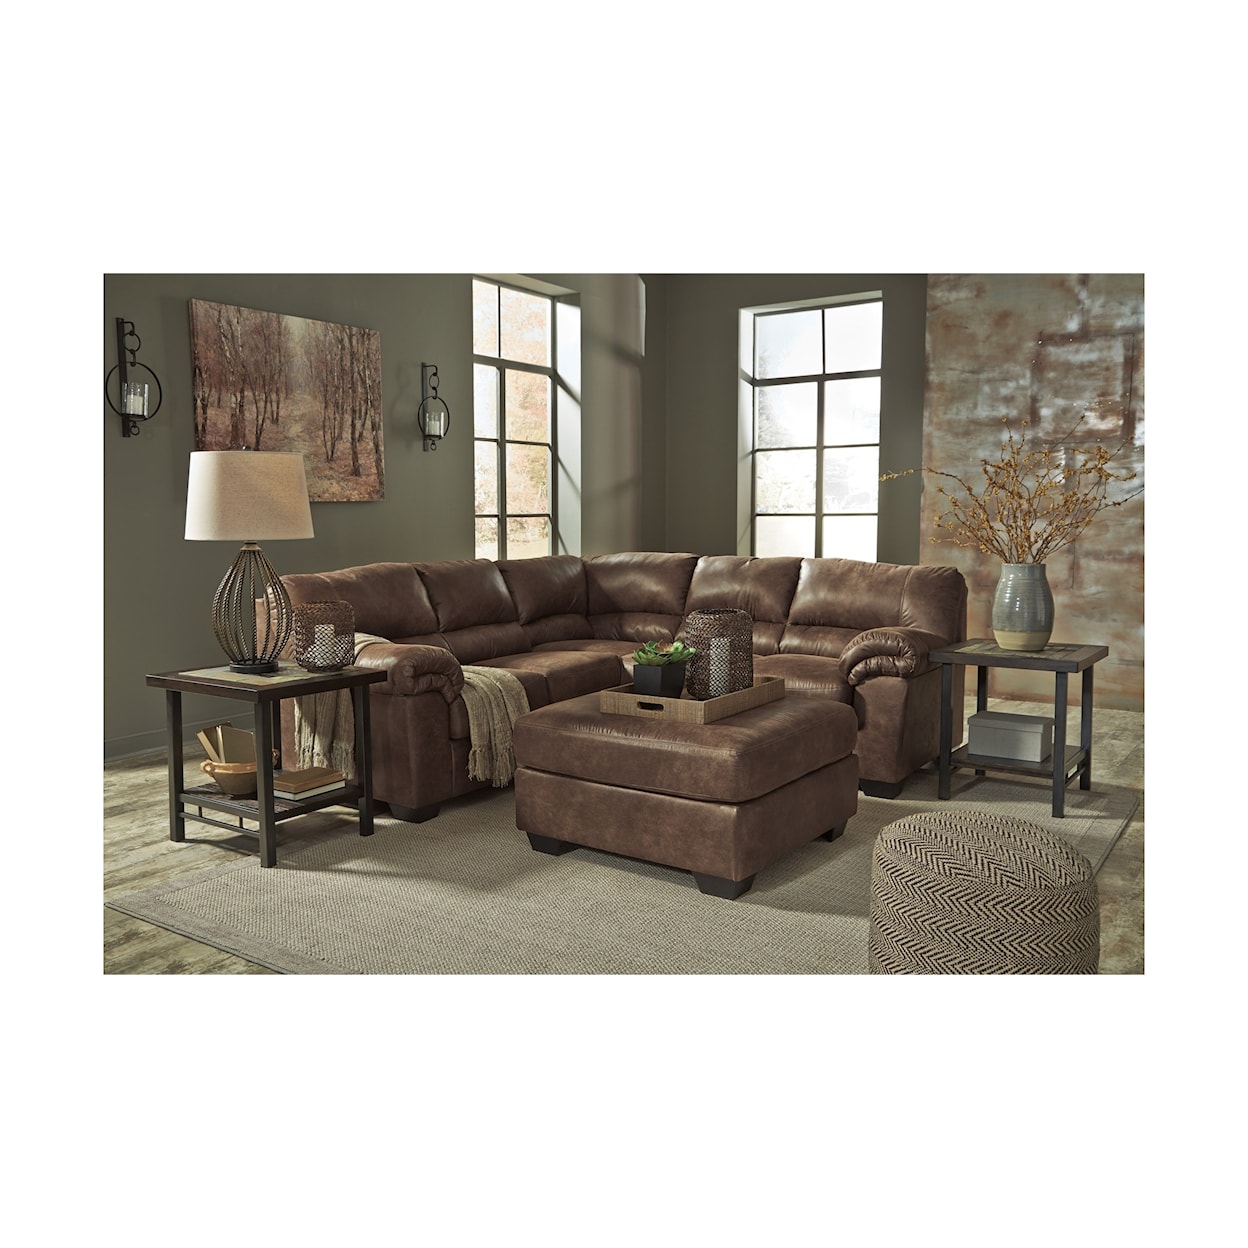 Ashley Furniture Signature Design Bladen 2-Piece Sectional with Ottoman